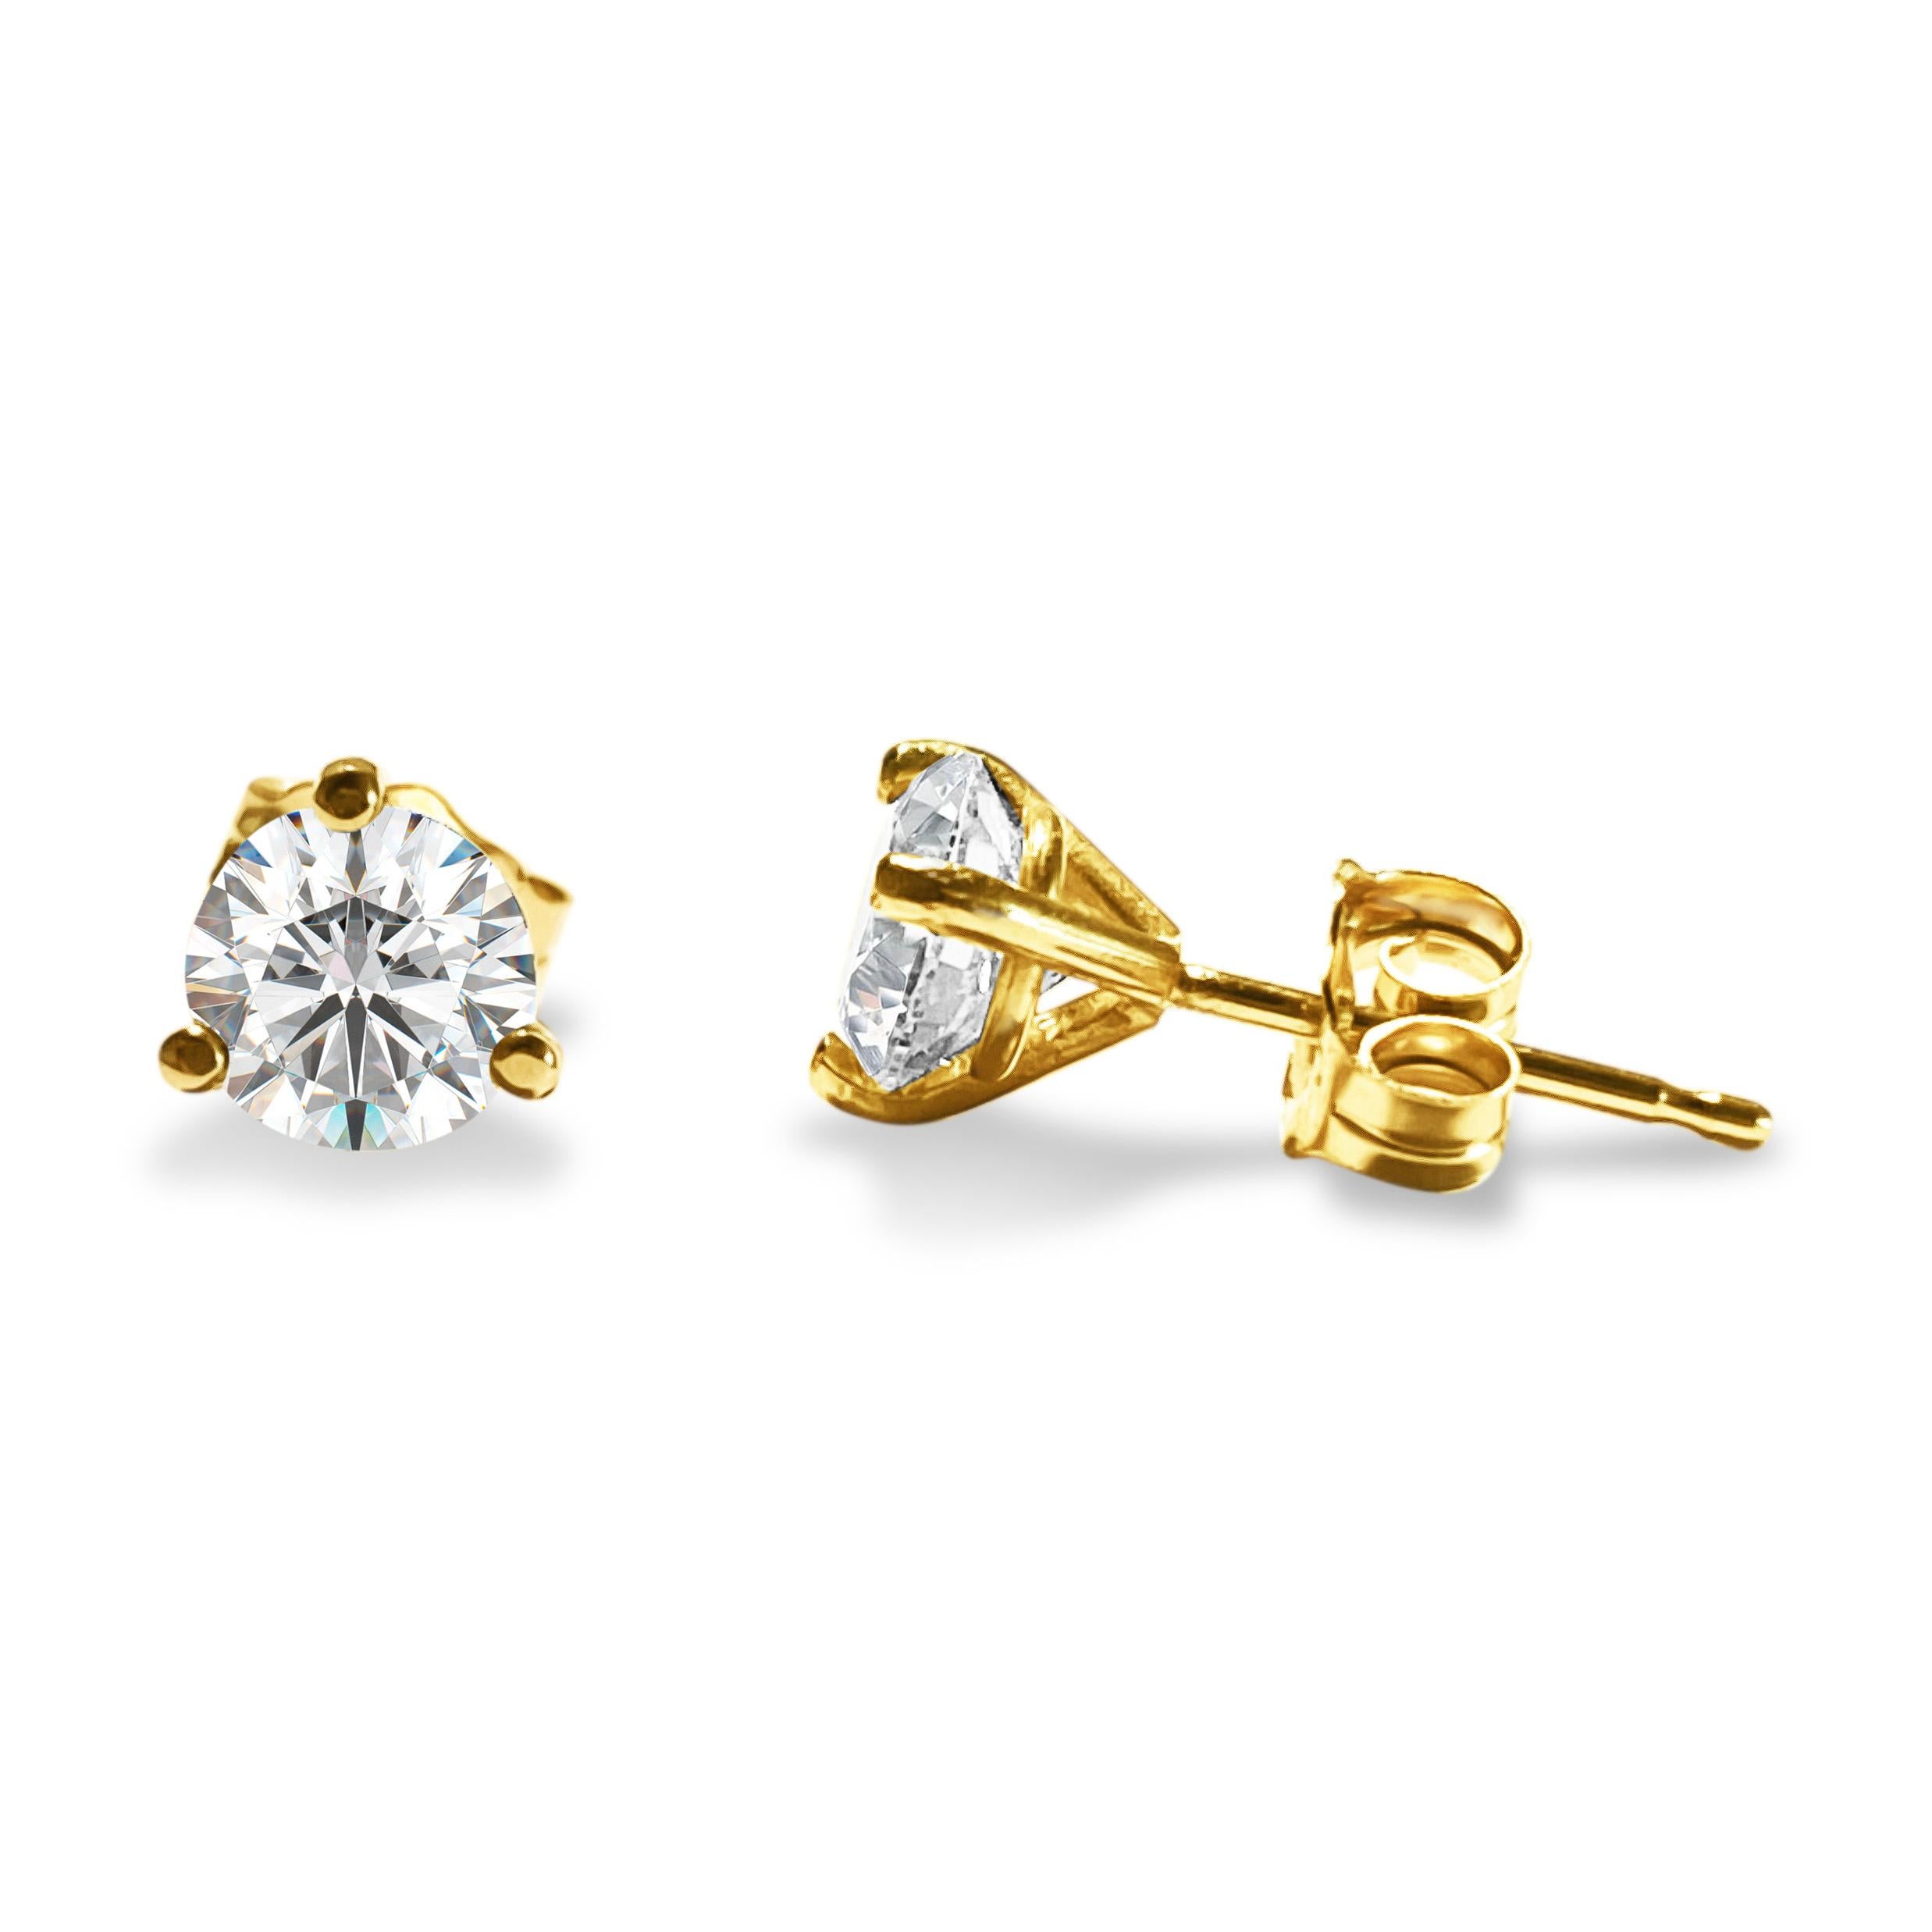 Elevate your style with these classic martini-style diamond stud earrings, crafted from 14k yellow gold and adorned with a total carat weight of 1.20 carats of round brilliant-cut diamonds. Set in three-prong martini style settings, these stunning